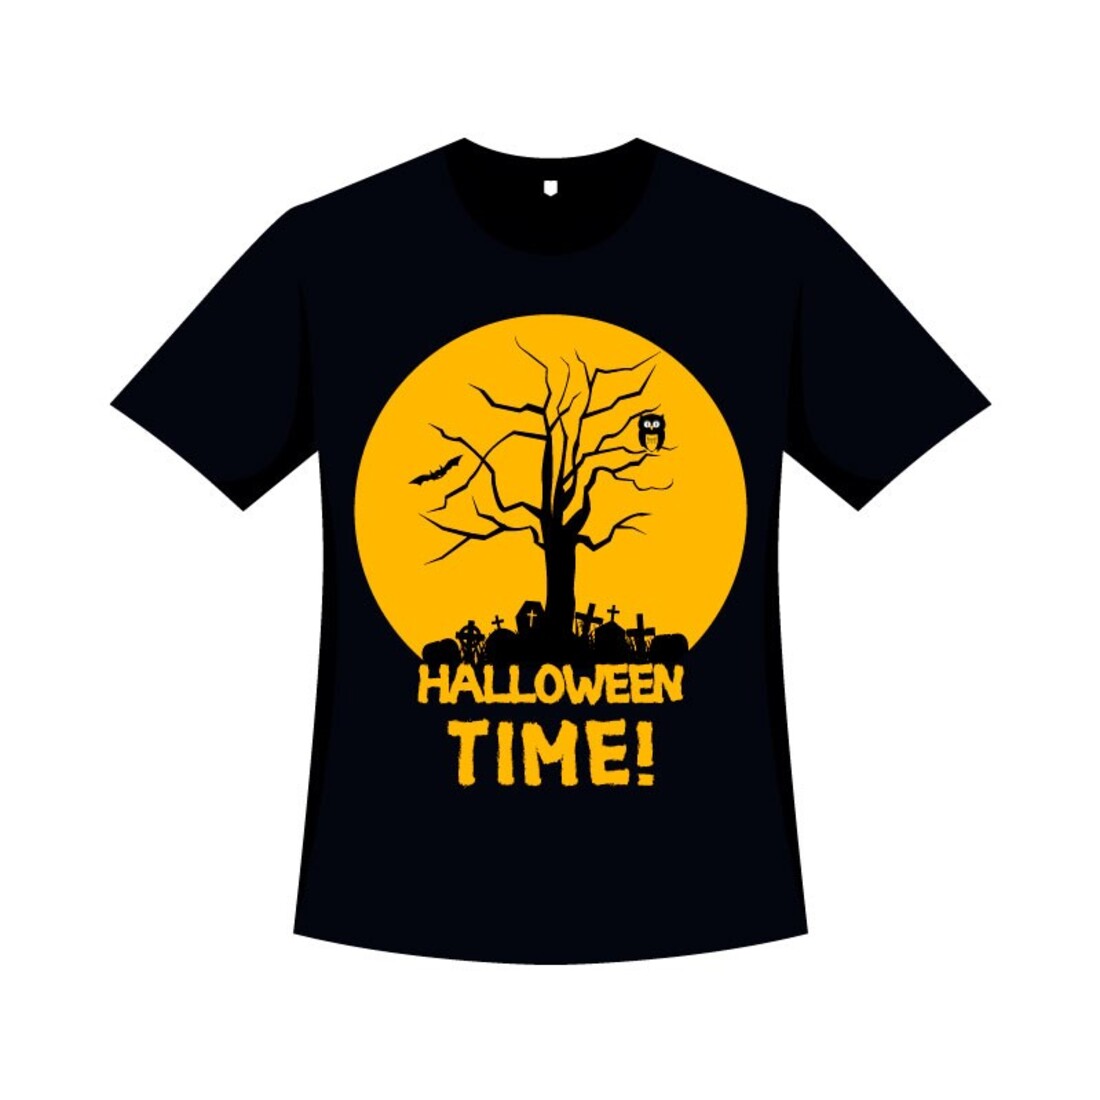 Silhouette T-shirt Design Halloween cover image.